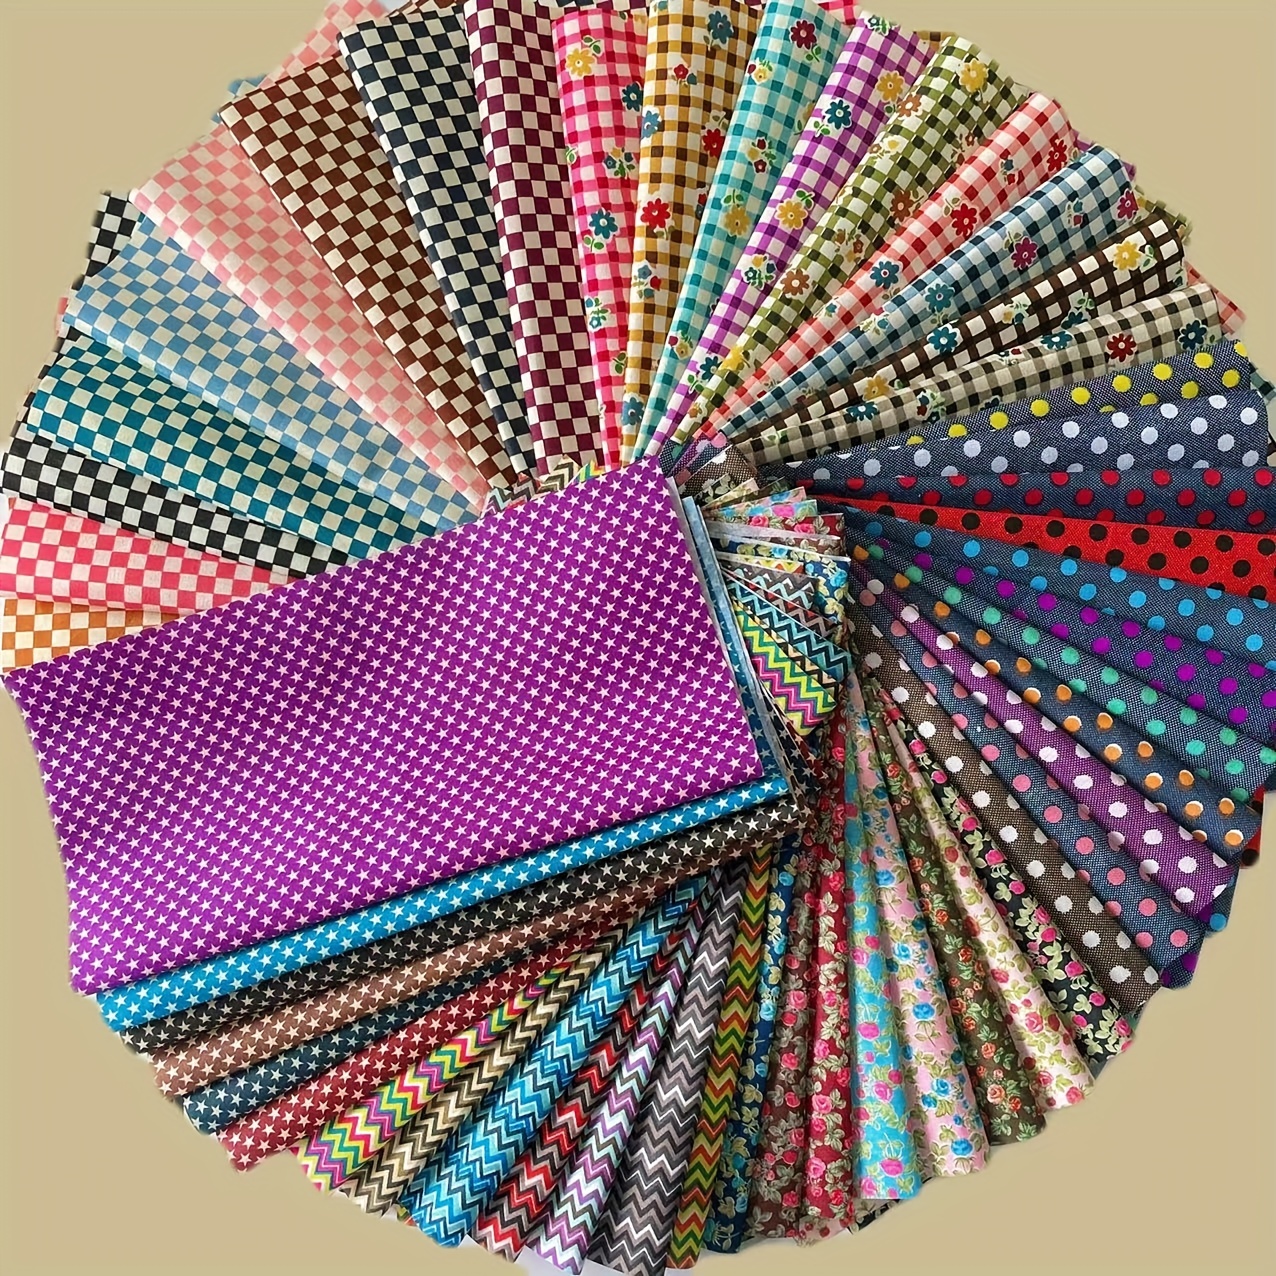 

50pcs Of Random Patterned Polyester Fabric Perfect For Diy Sewing, Scrapbooking And Quilting